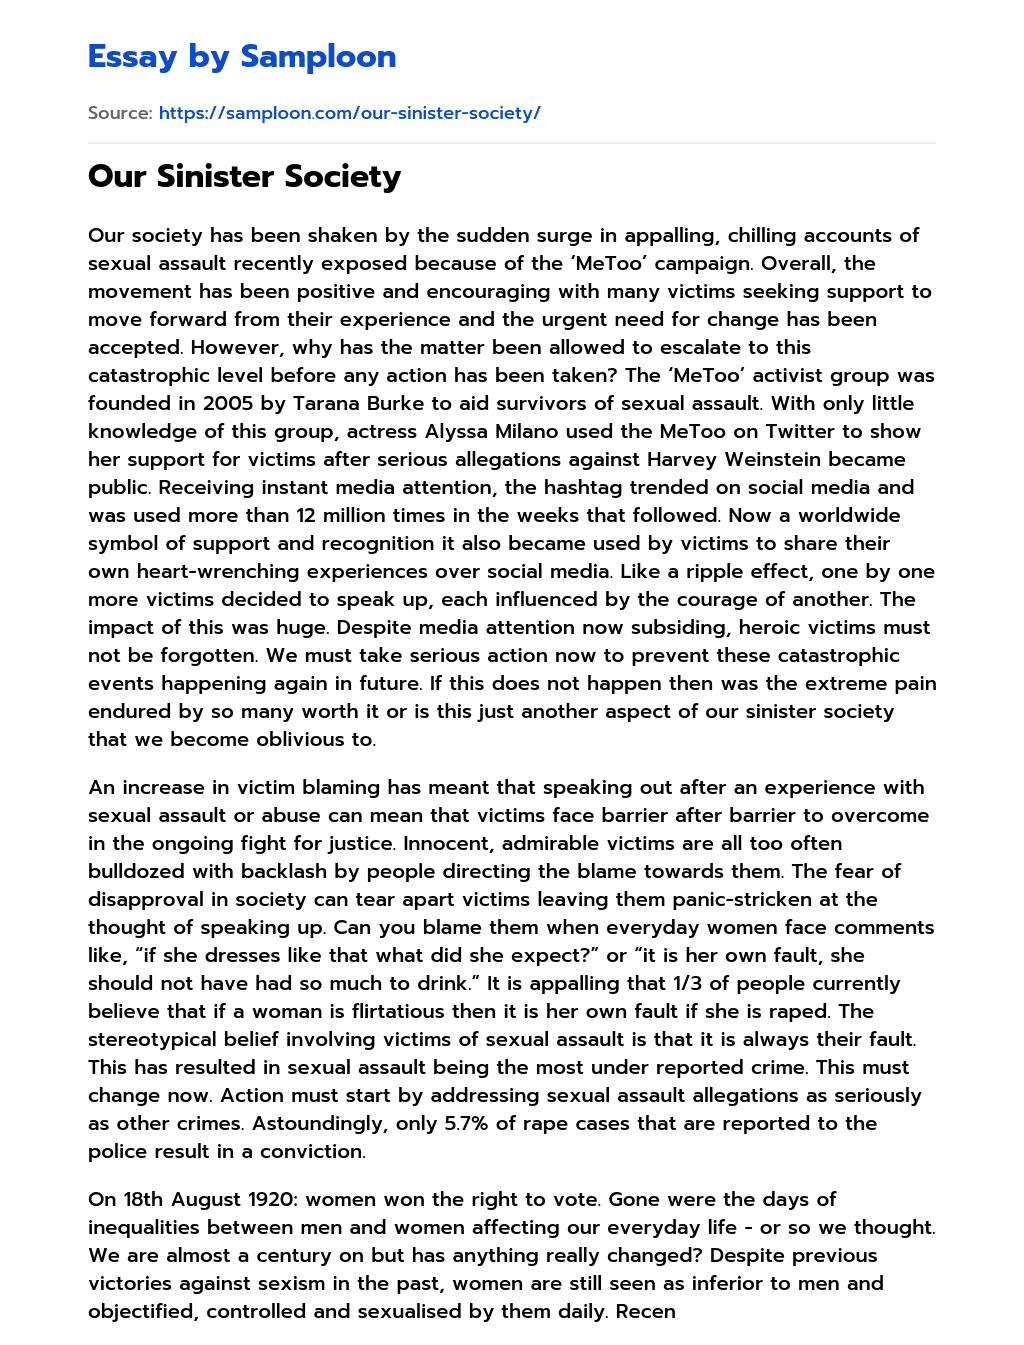 Our Sinister Society essay